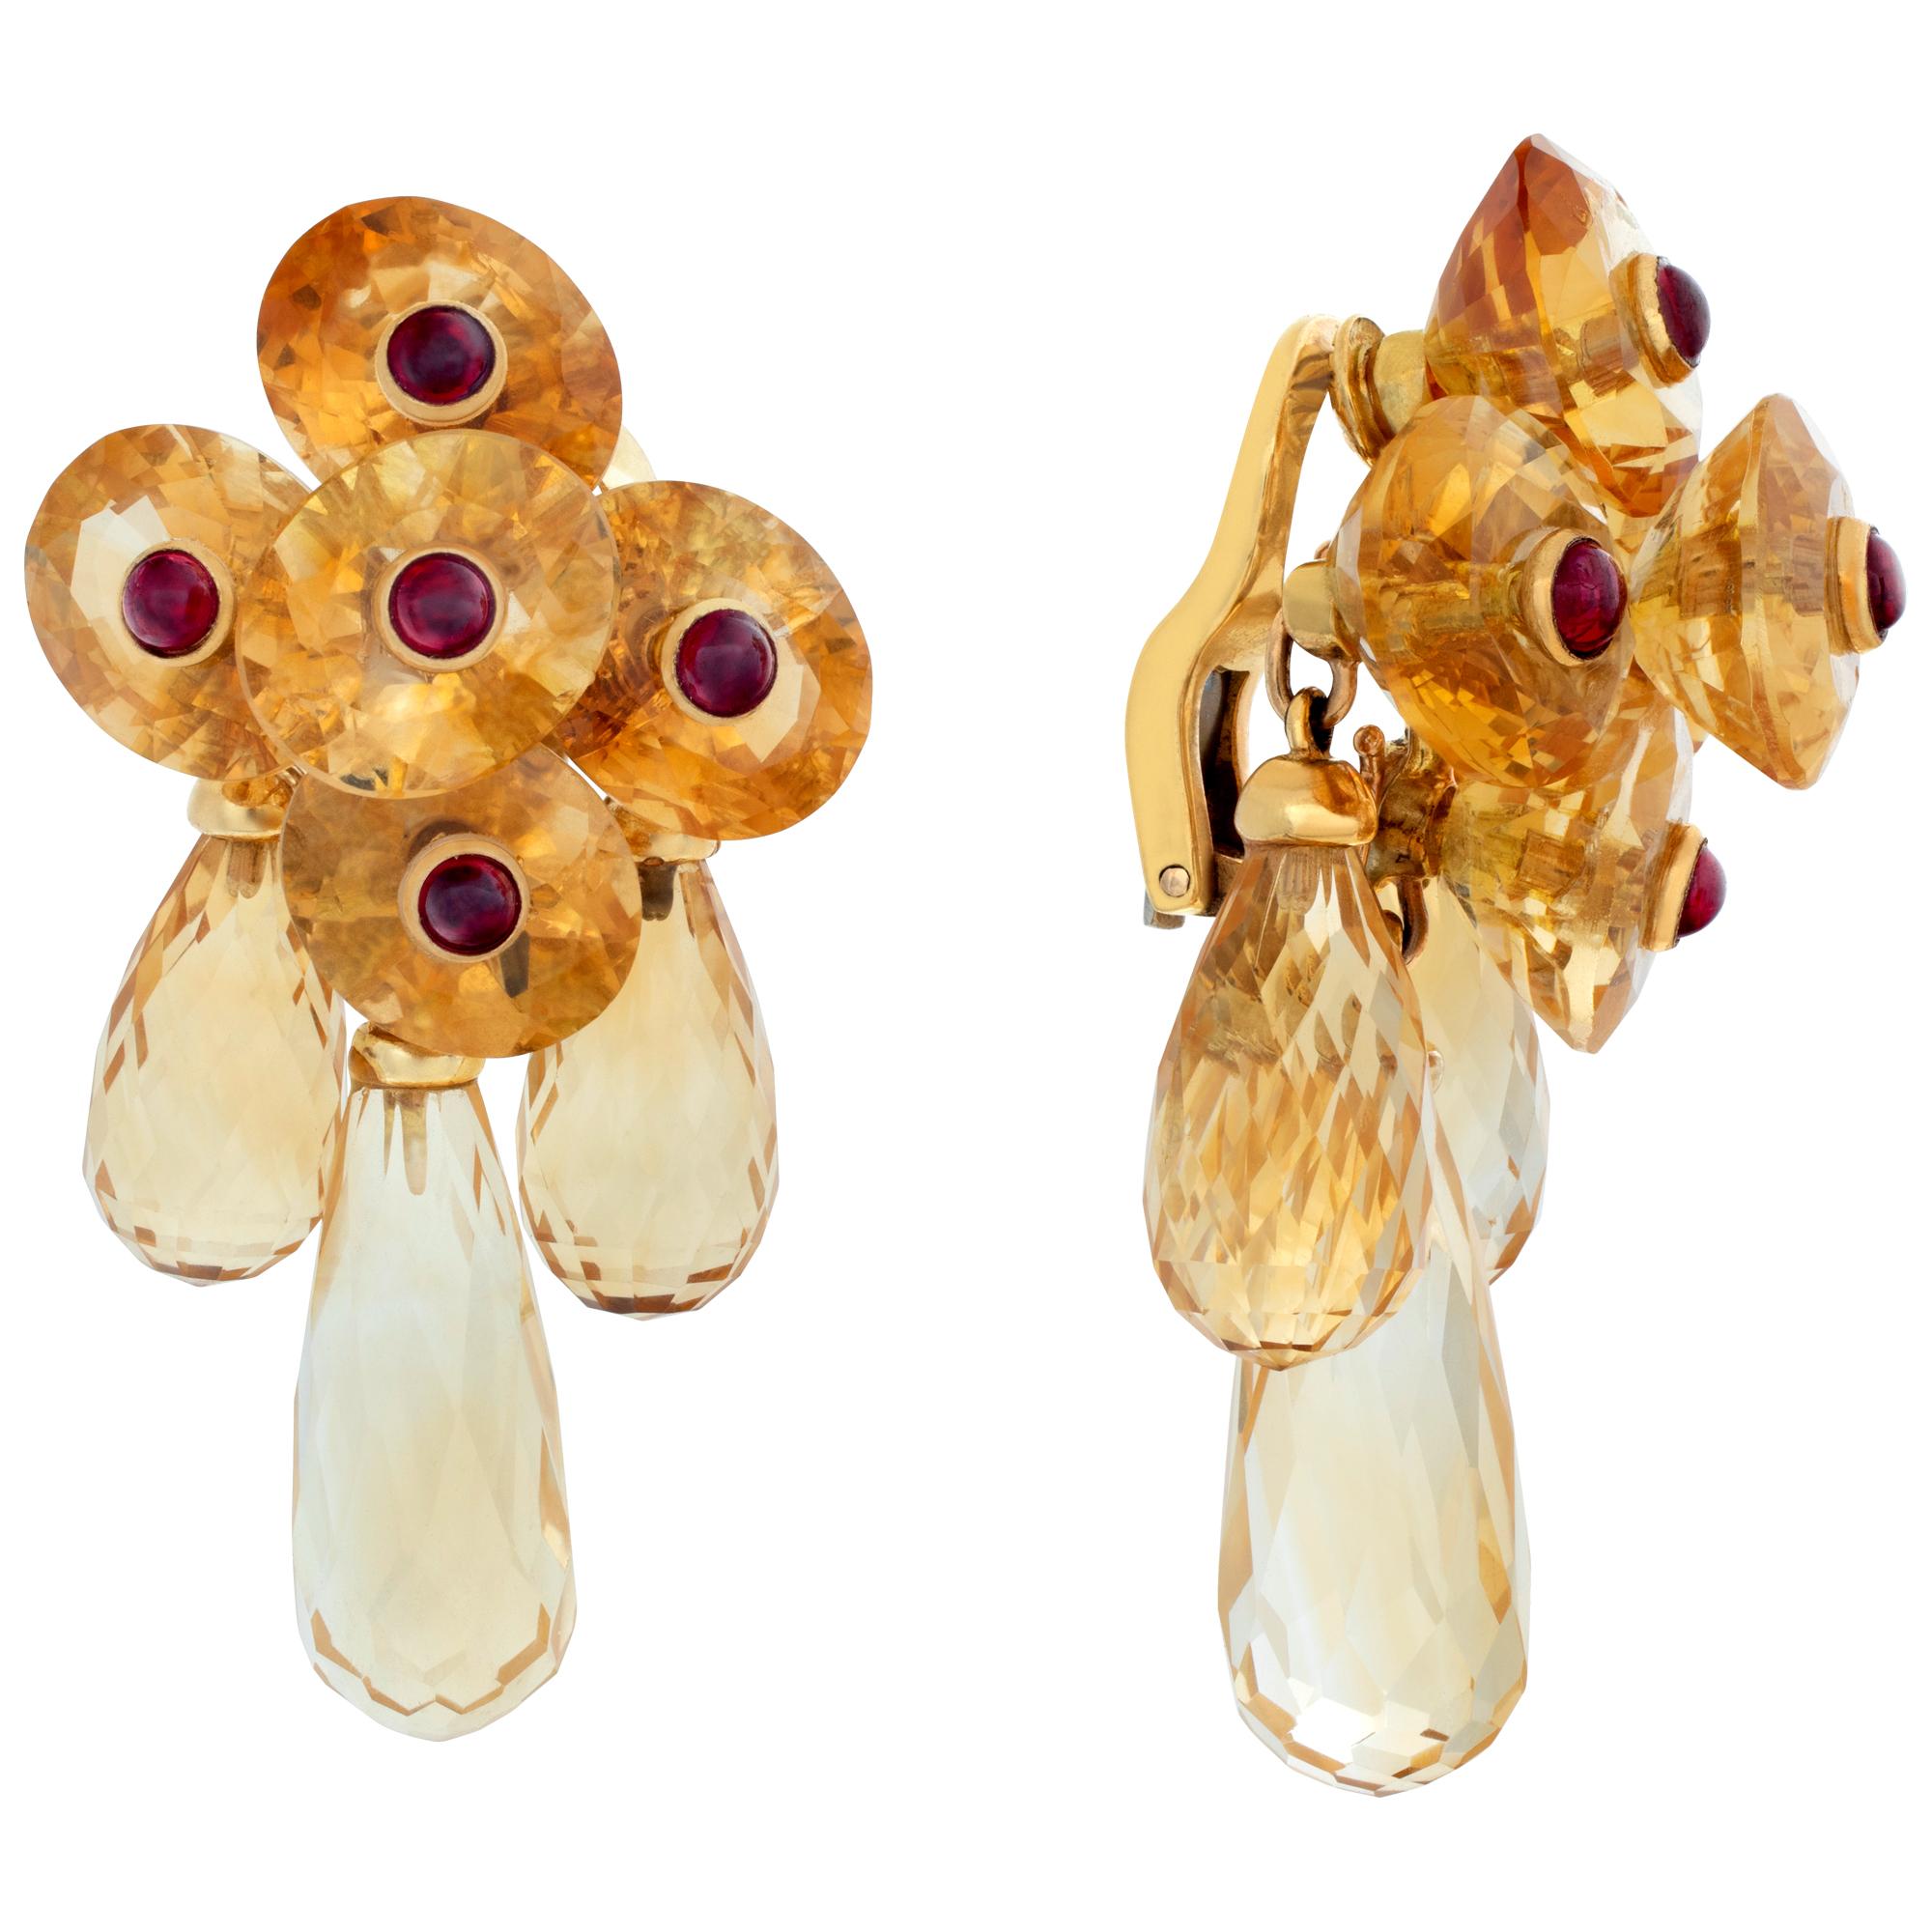 Oval brilliant cut, faceted citrine beads with cabochon ruby center, dangling briolet cut earrings set in 18K gold. Three Briolet cut dangling citrine  on each earring can be removed for a less formal look. Post can be added upon request.
